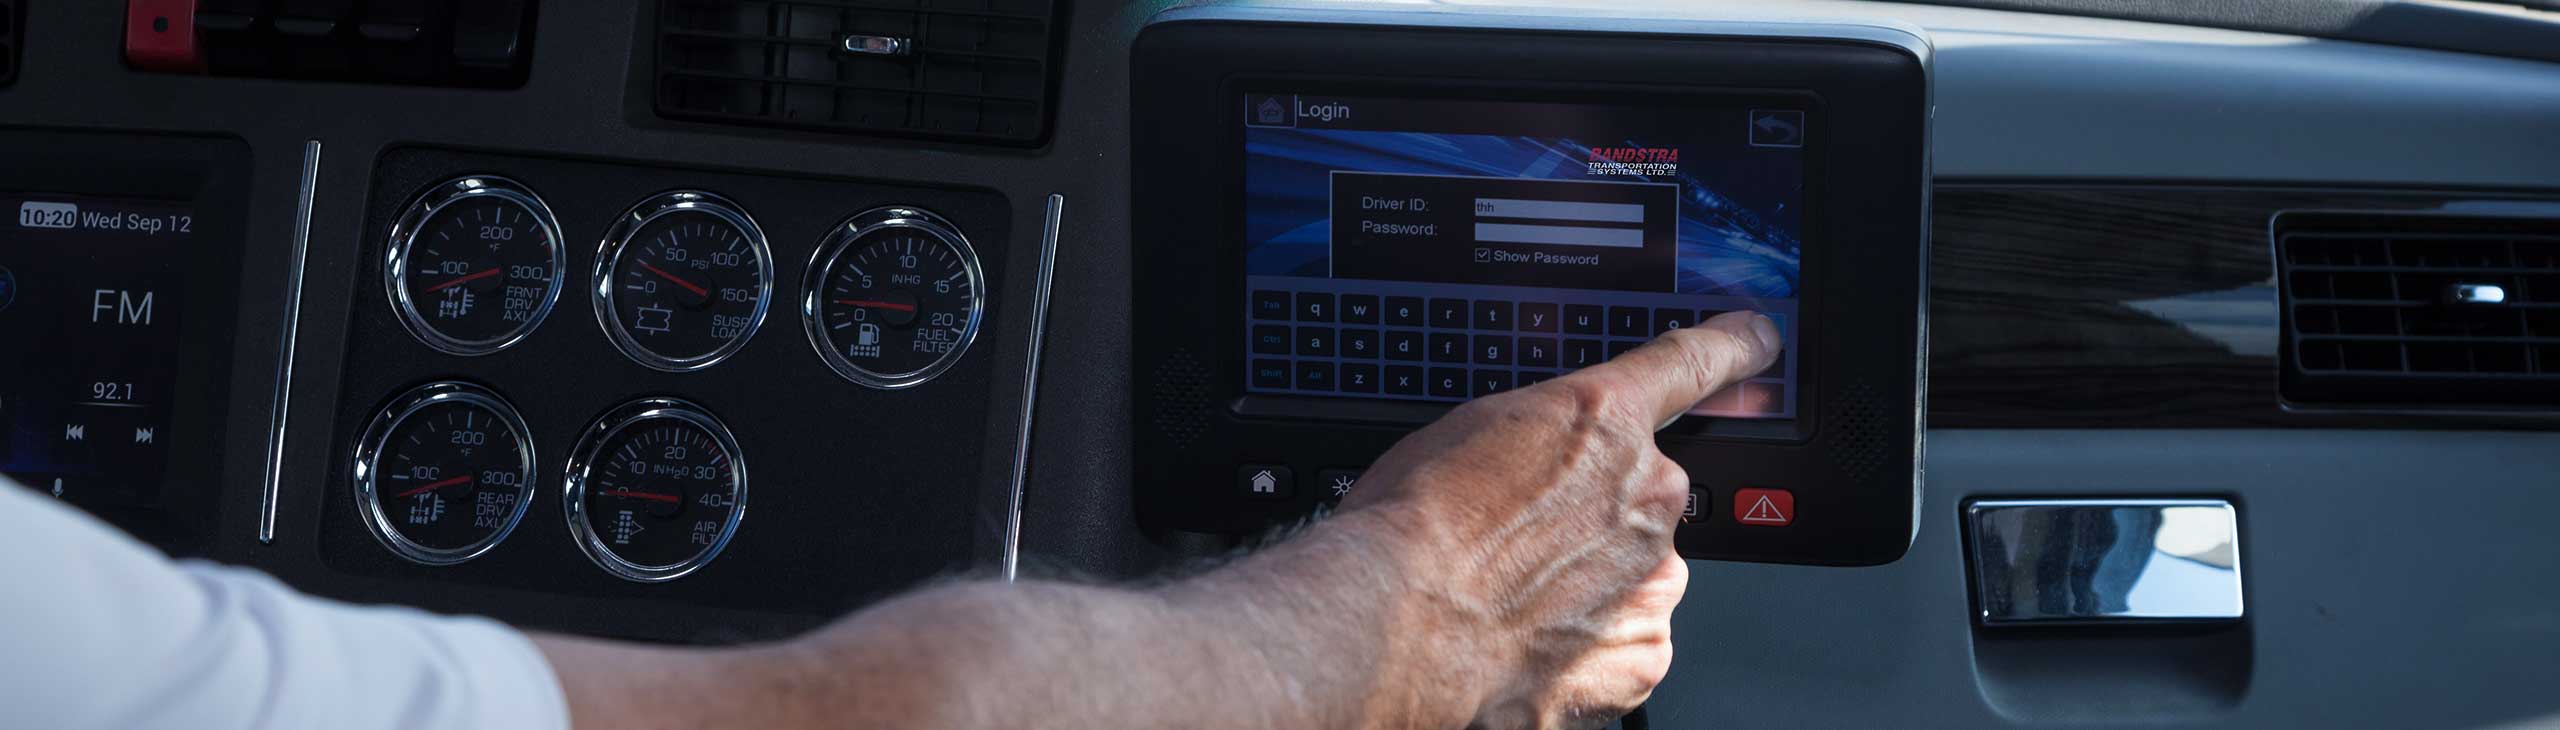 Bandstra driver using Electronic Log Device on dashboard